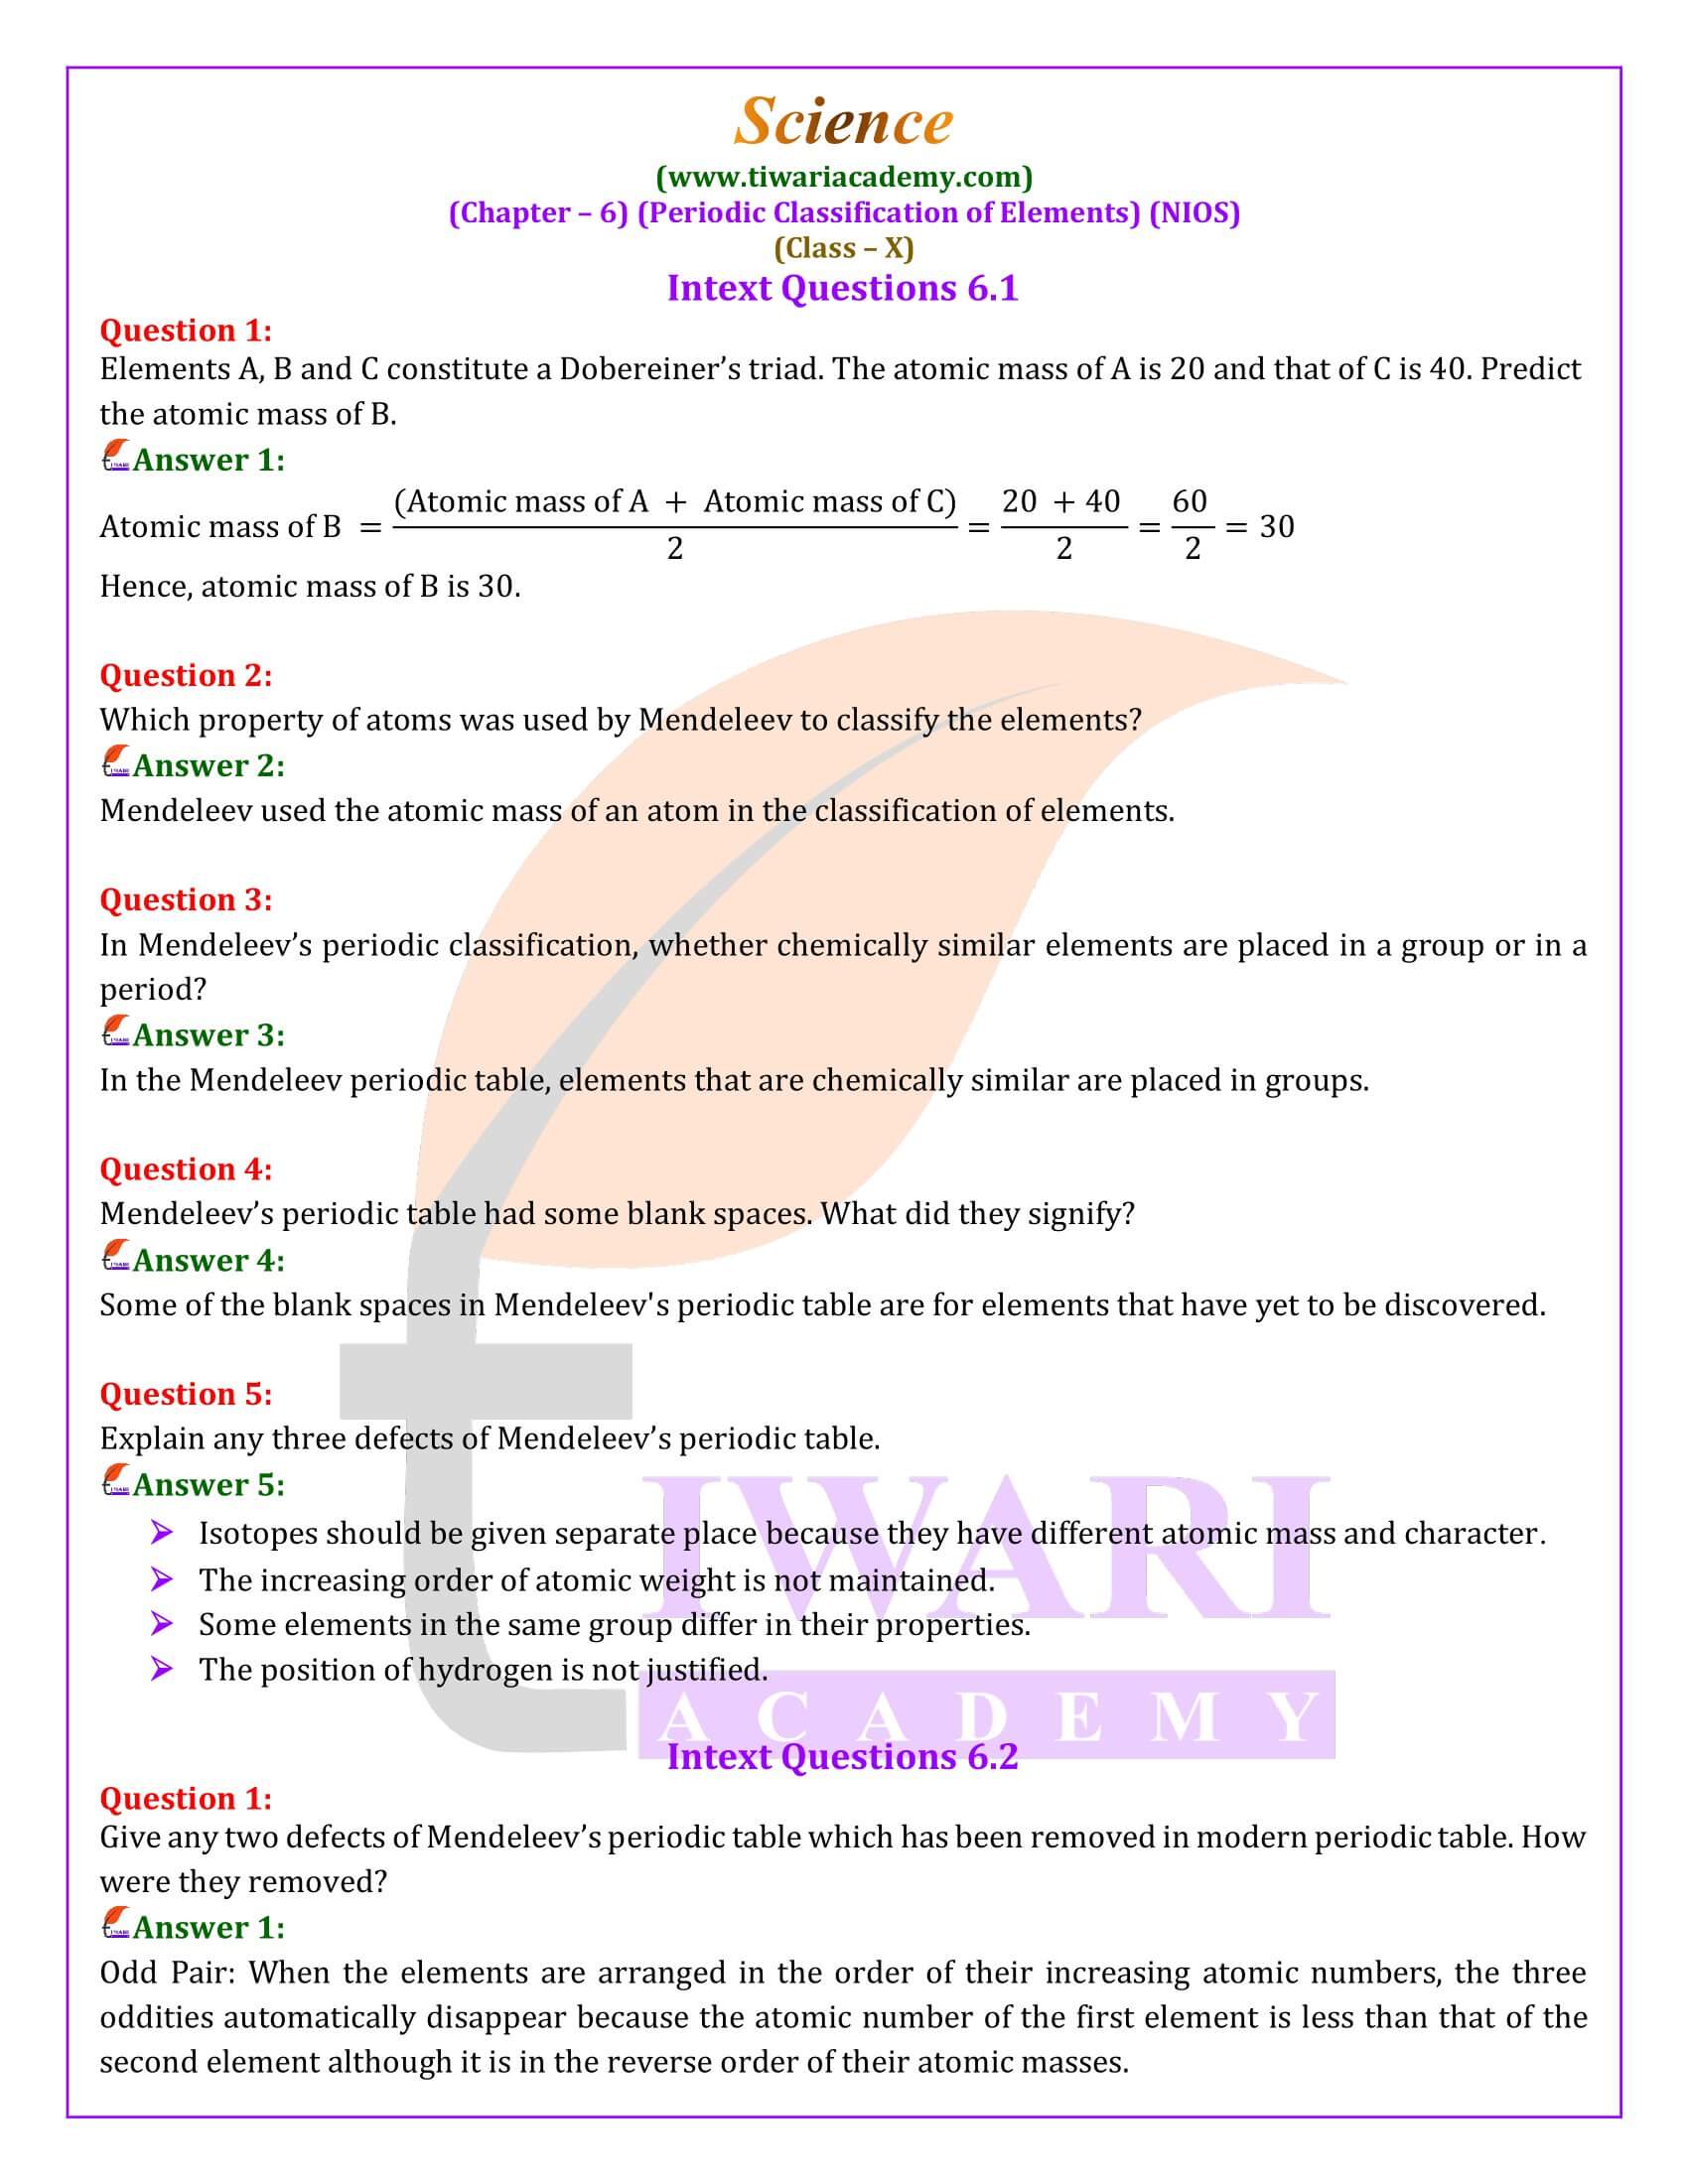 NIOS Class 10 Science Chapter 6 Periodic Classification of Elements Question Answers